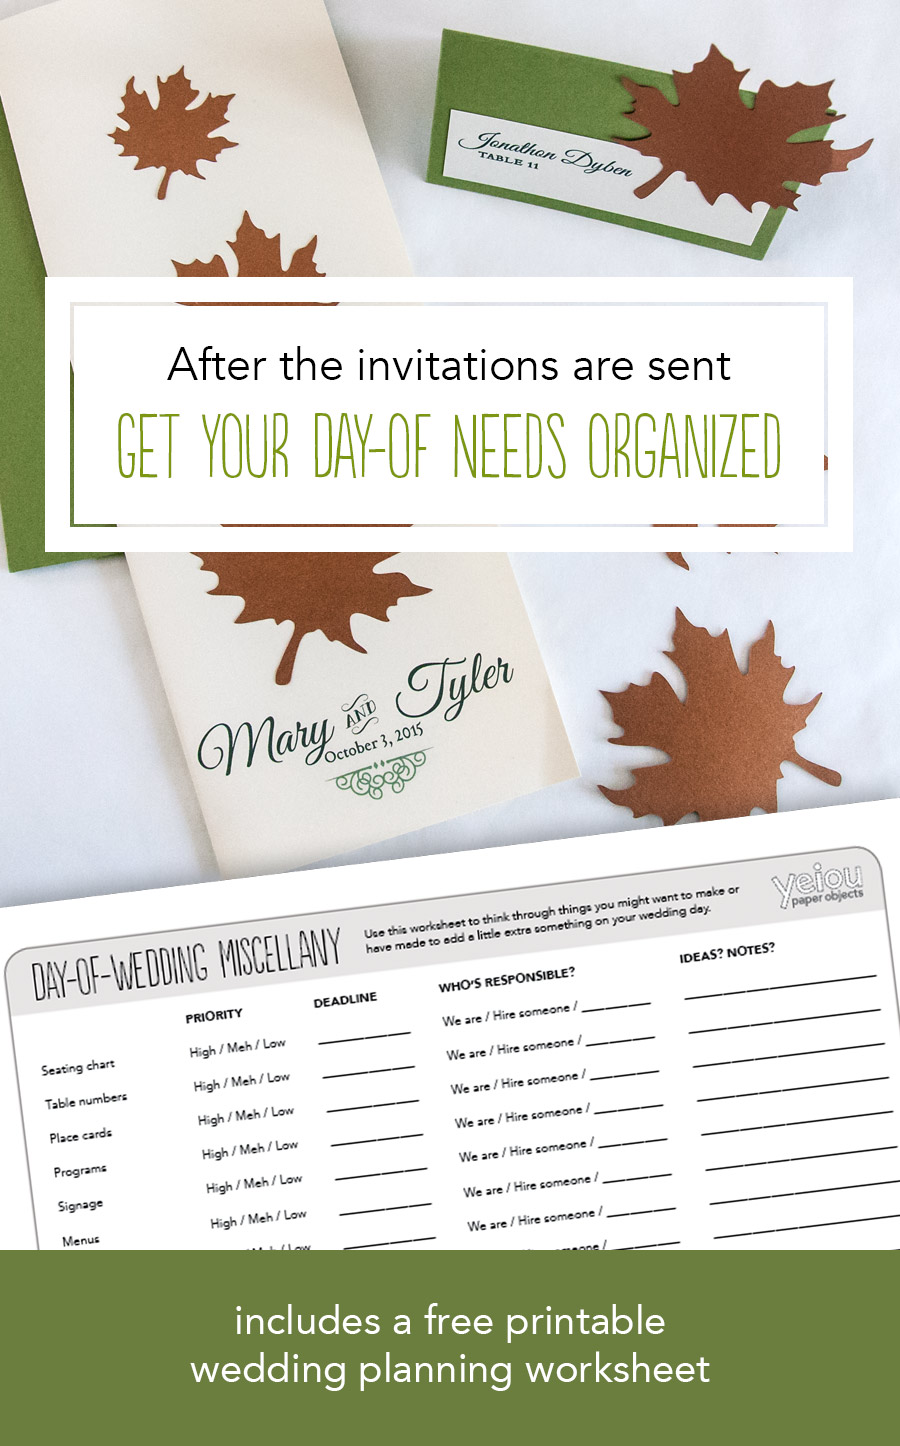 After the Invitations are Sent: Making a Plan for Day-of-Wedding needs